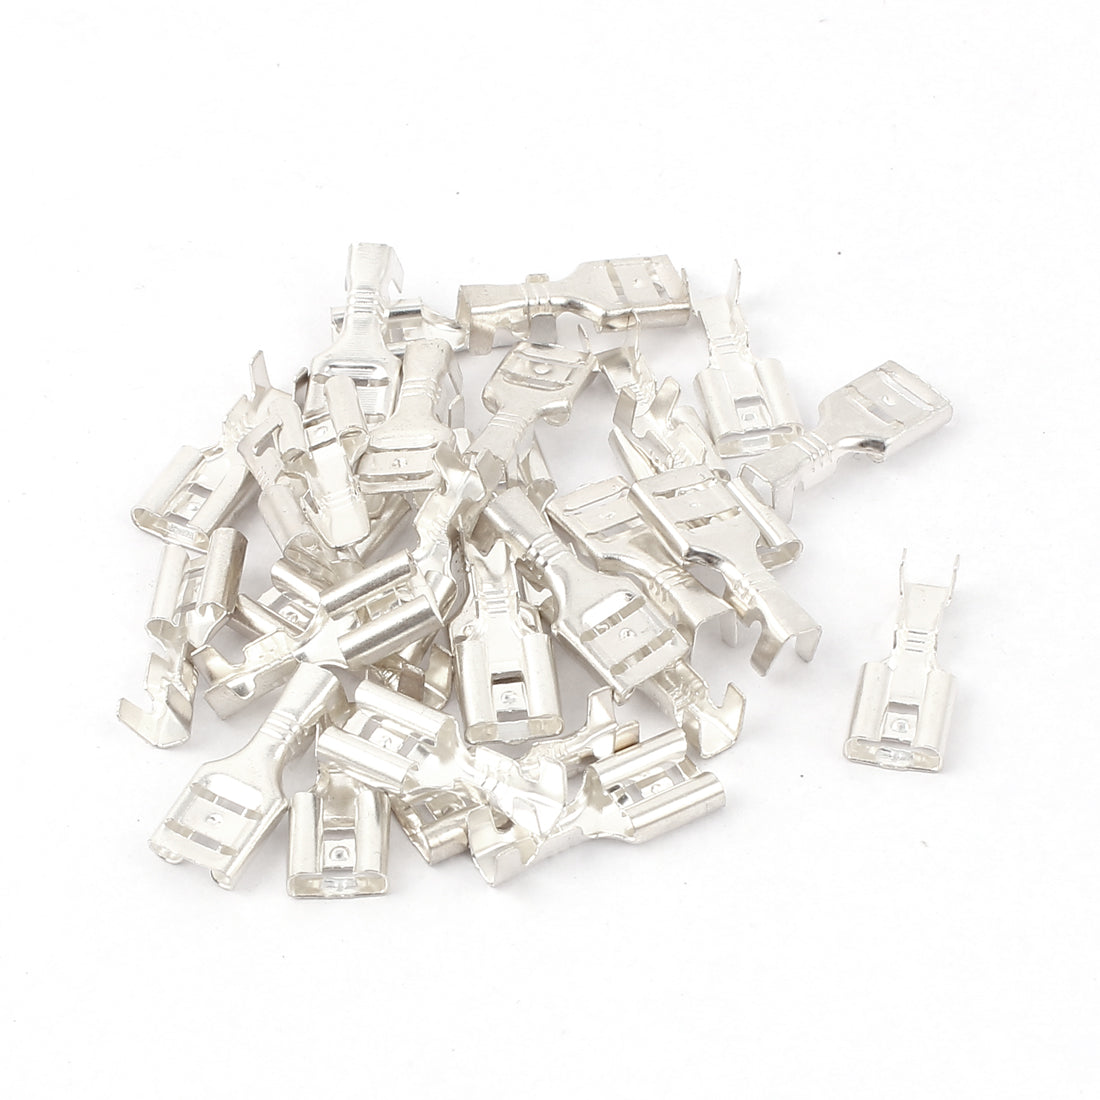 uxcell Uxcell 30 Pcs Speaker 6.3mm Crimp Female Spade Terminal Connector